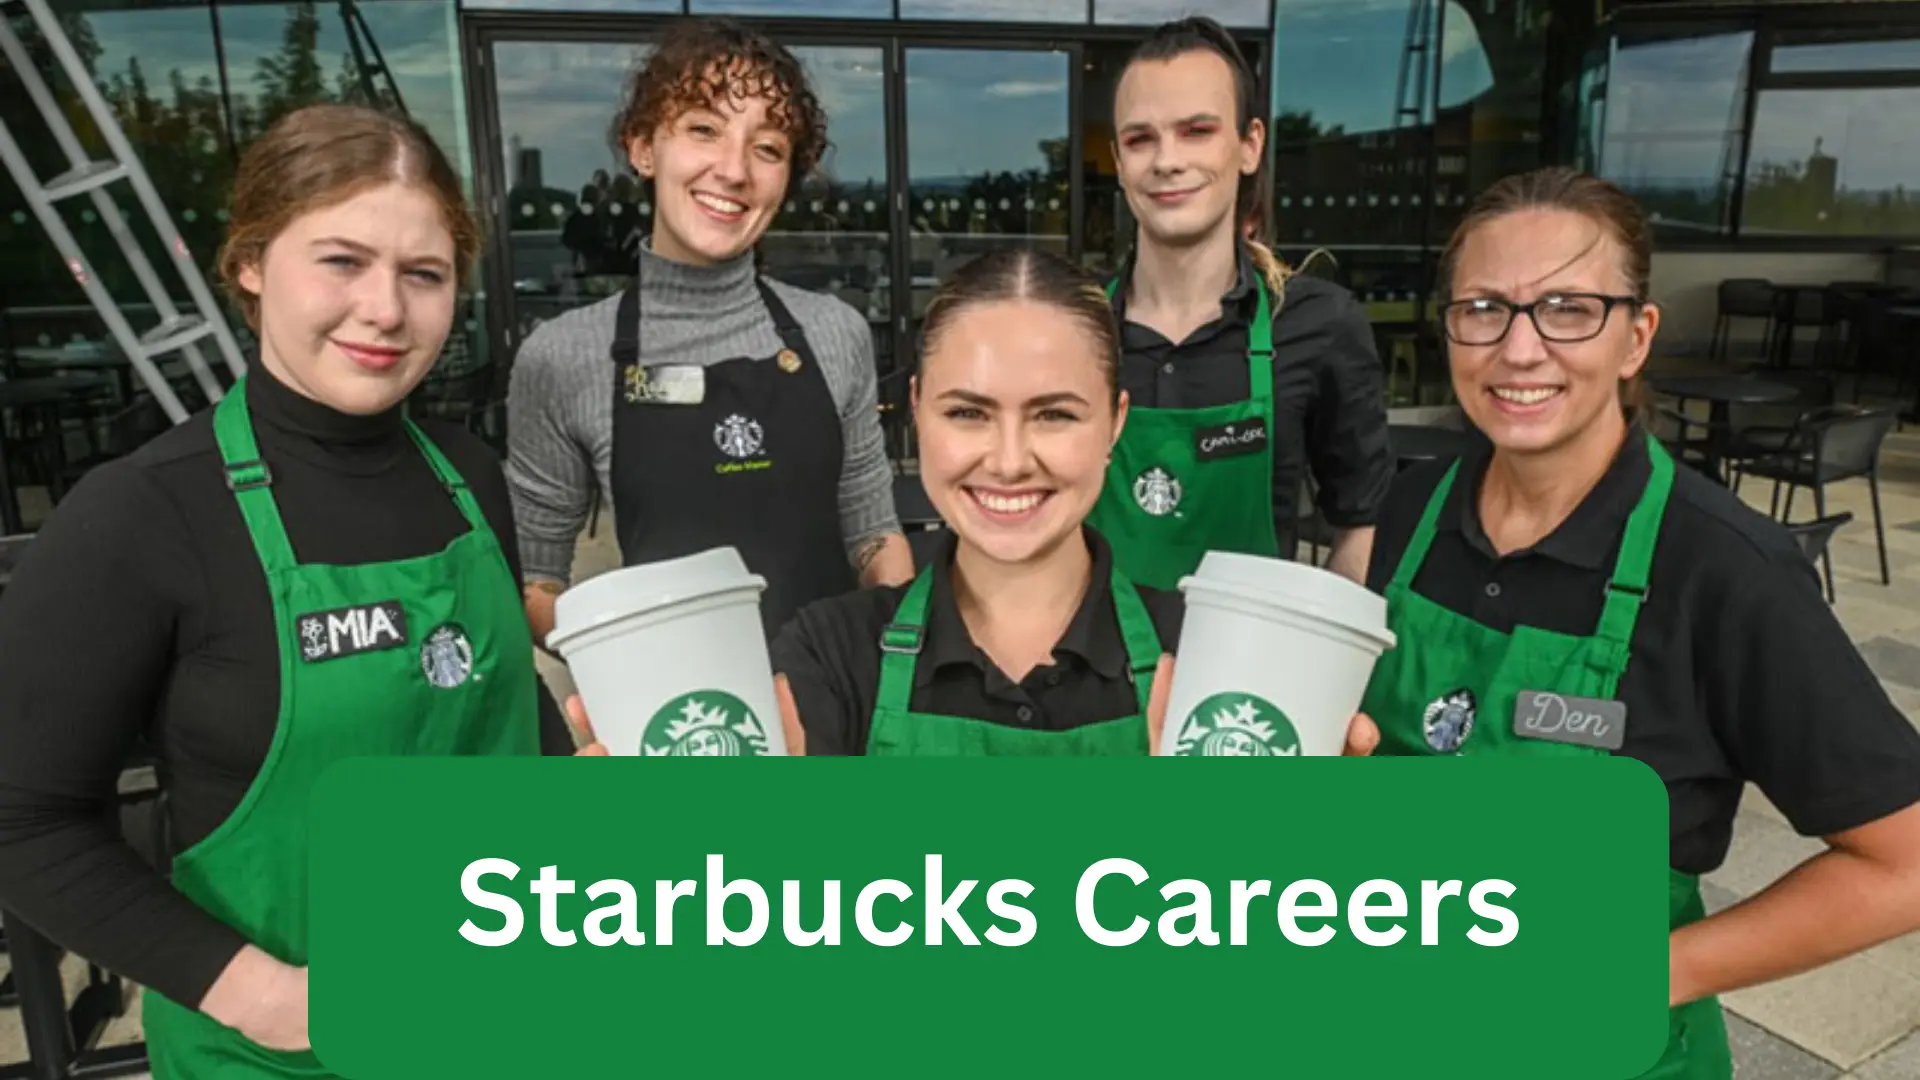 Starbucks Careers 101: Everything You Need to Know to Get Started